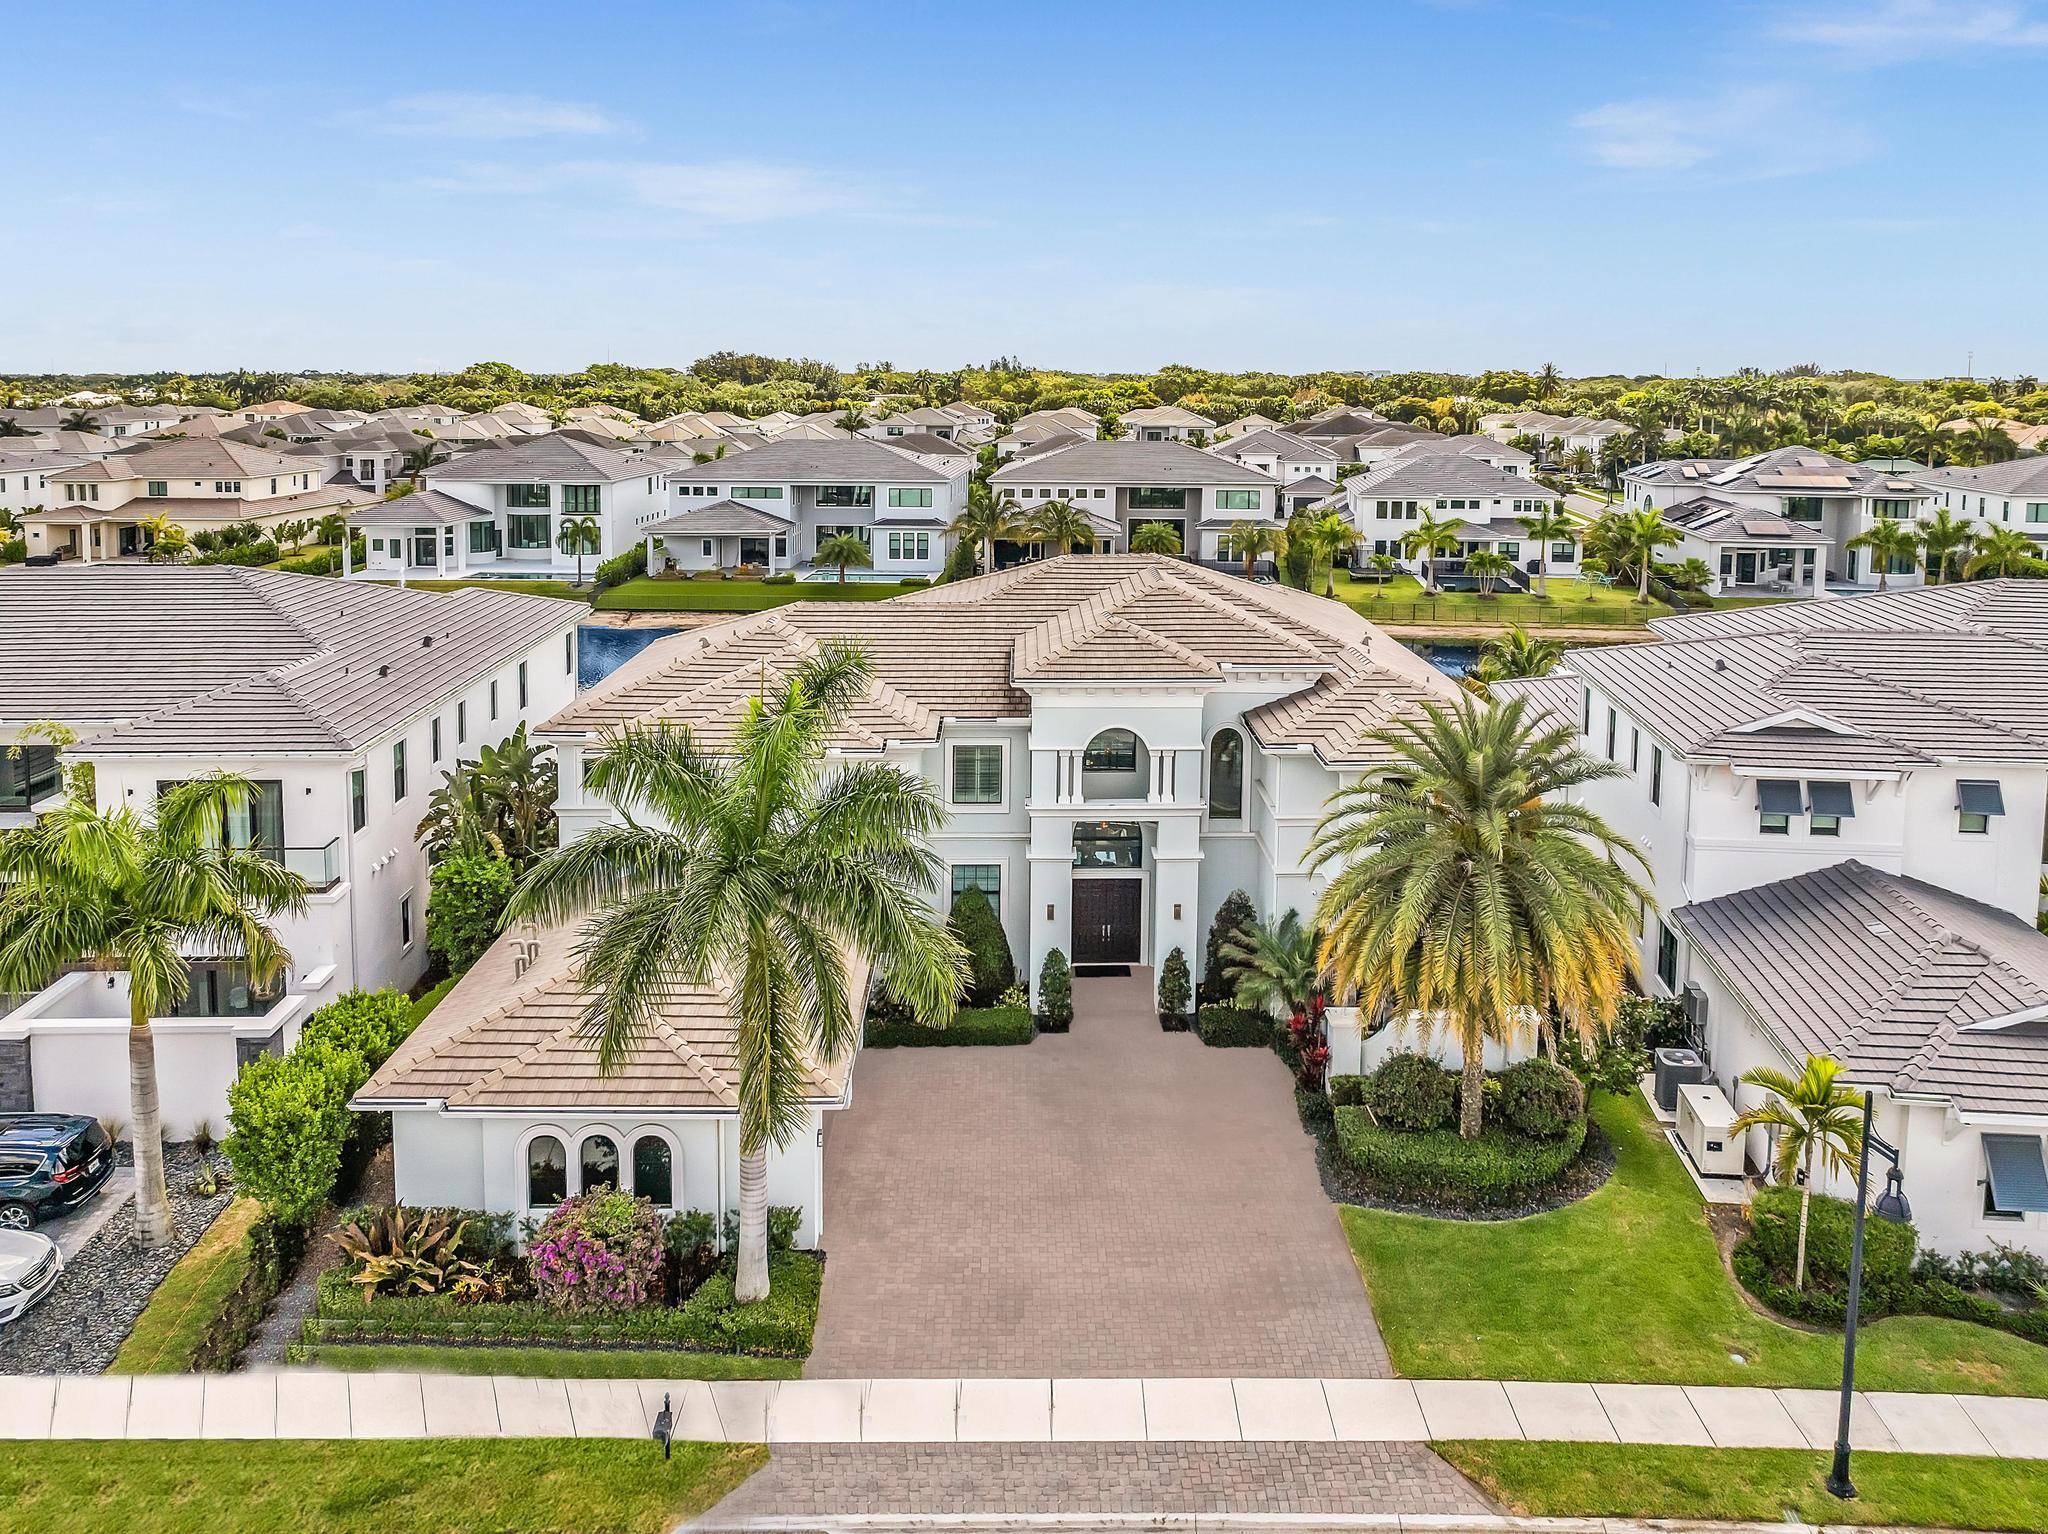 Discover the pinnacle of luxury in Boca Raton's prestigious Royal Palm Polo with this exquisite Villa Lago Chateau by Spanning 7, 307 sq ft, this home features a grand two ...